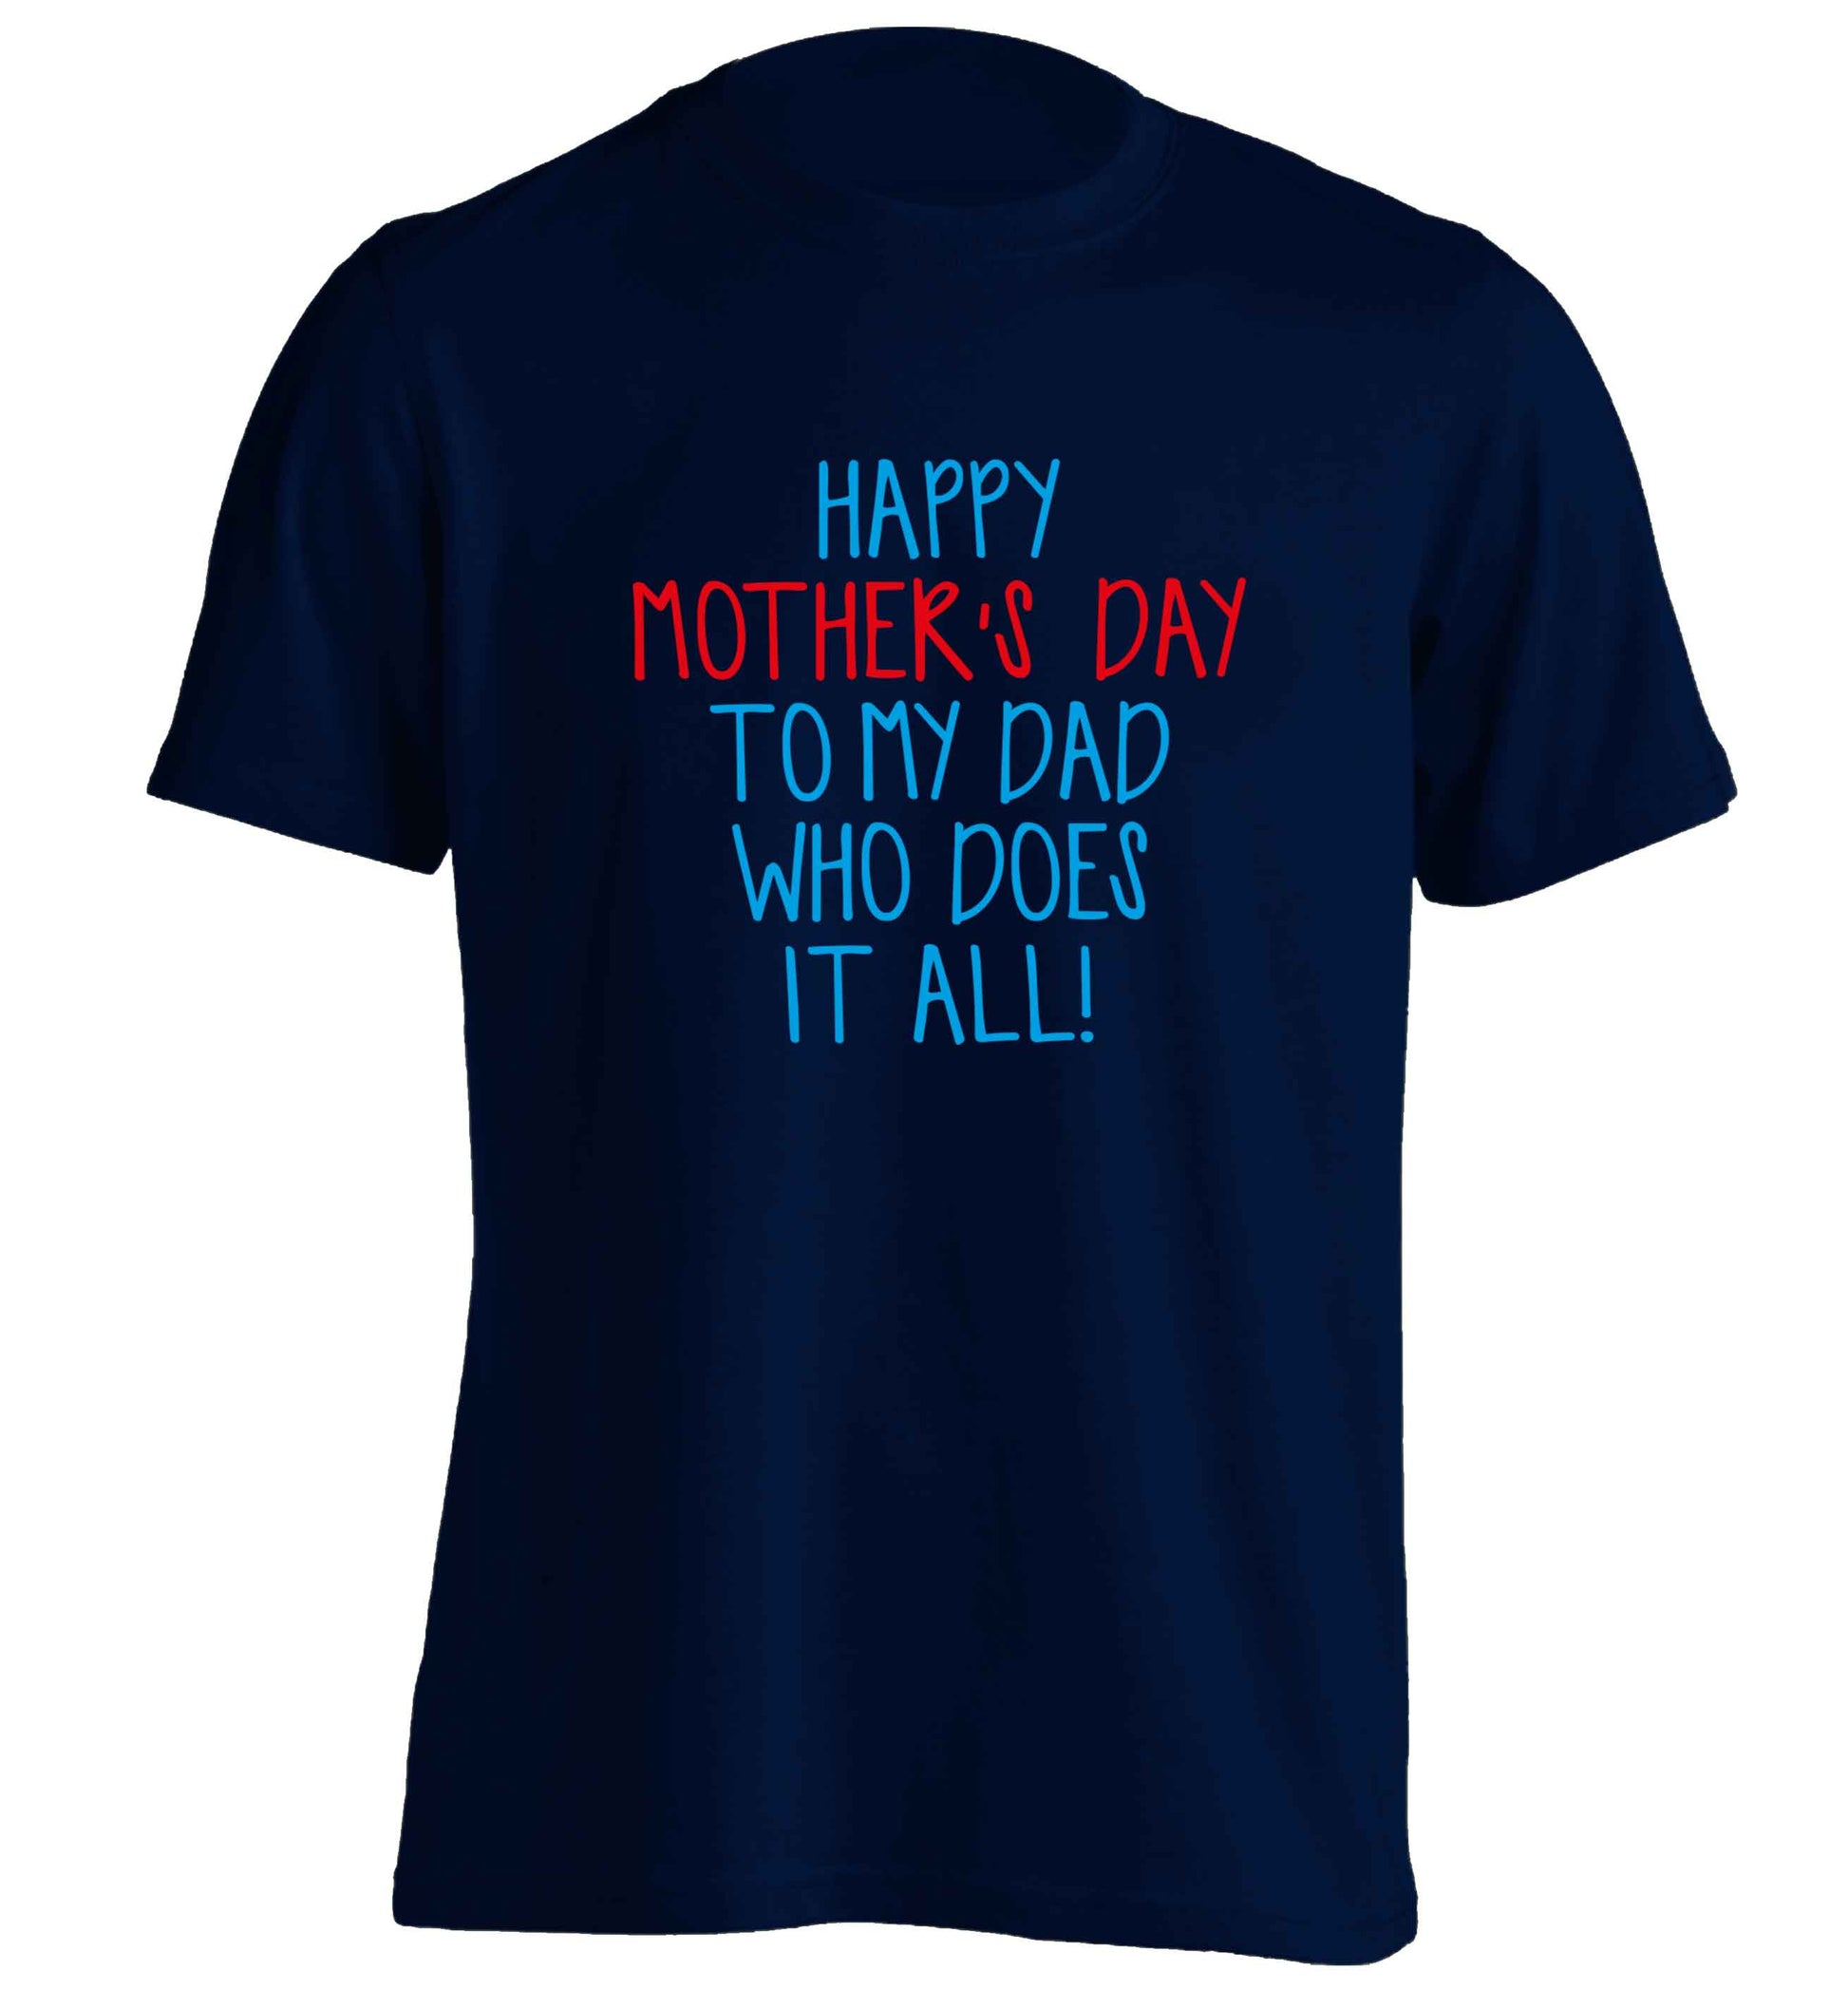 Happy mother's day to my dad who does it all! adults unisex navy Tshirt 2XL